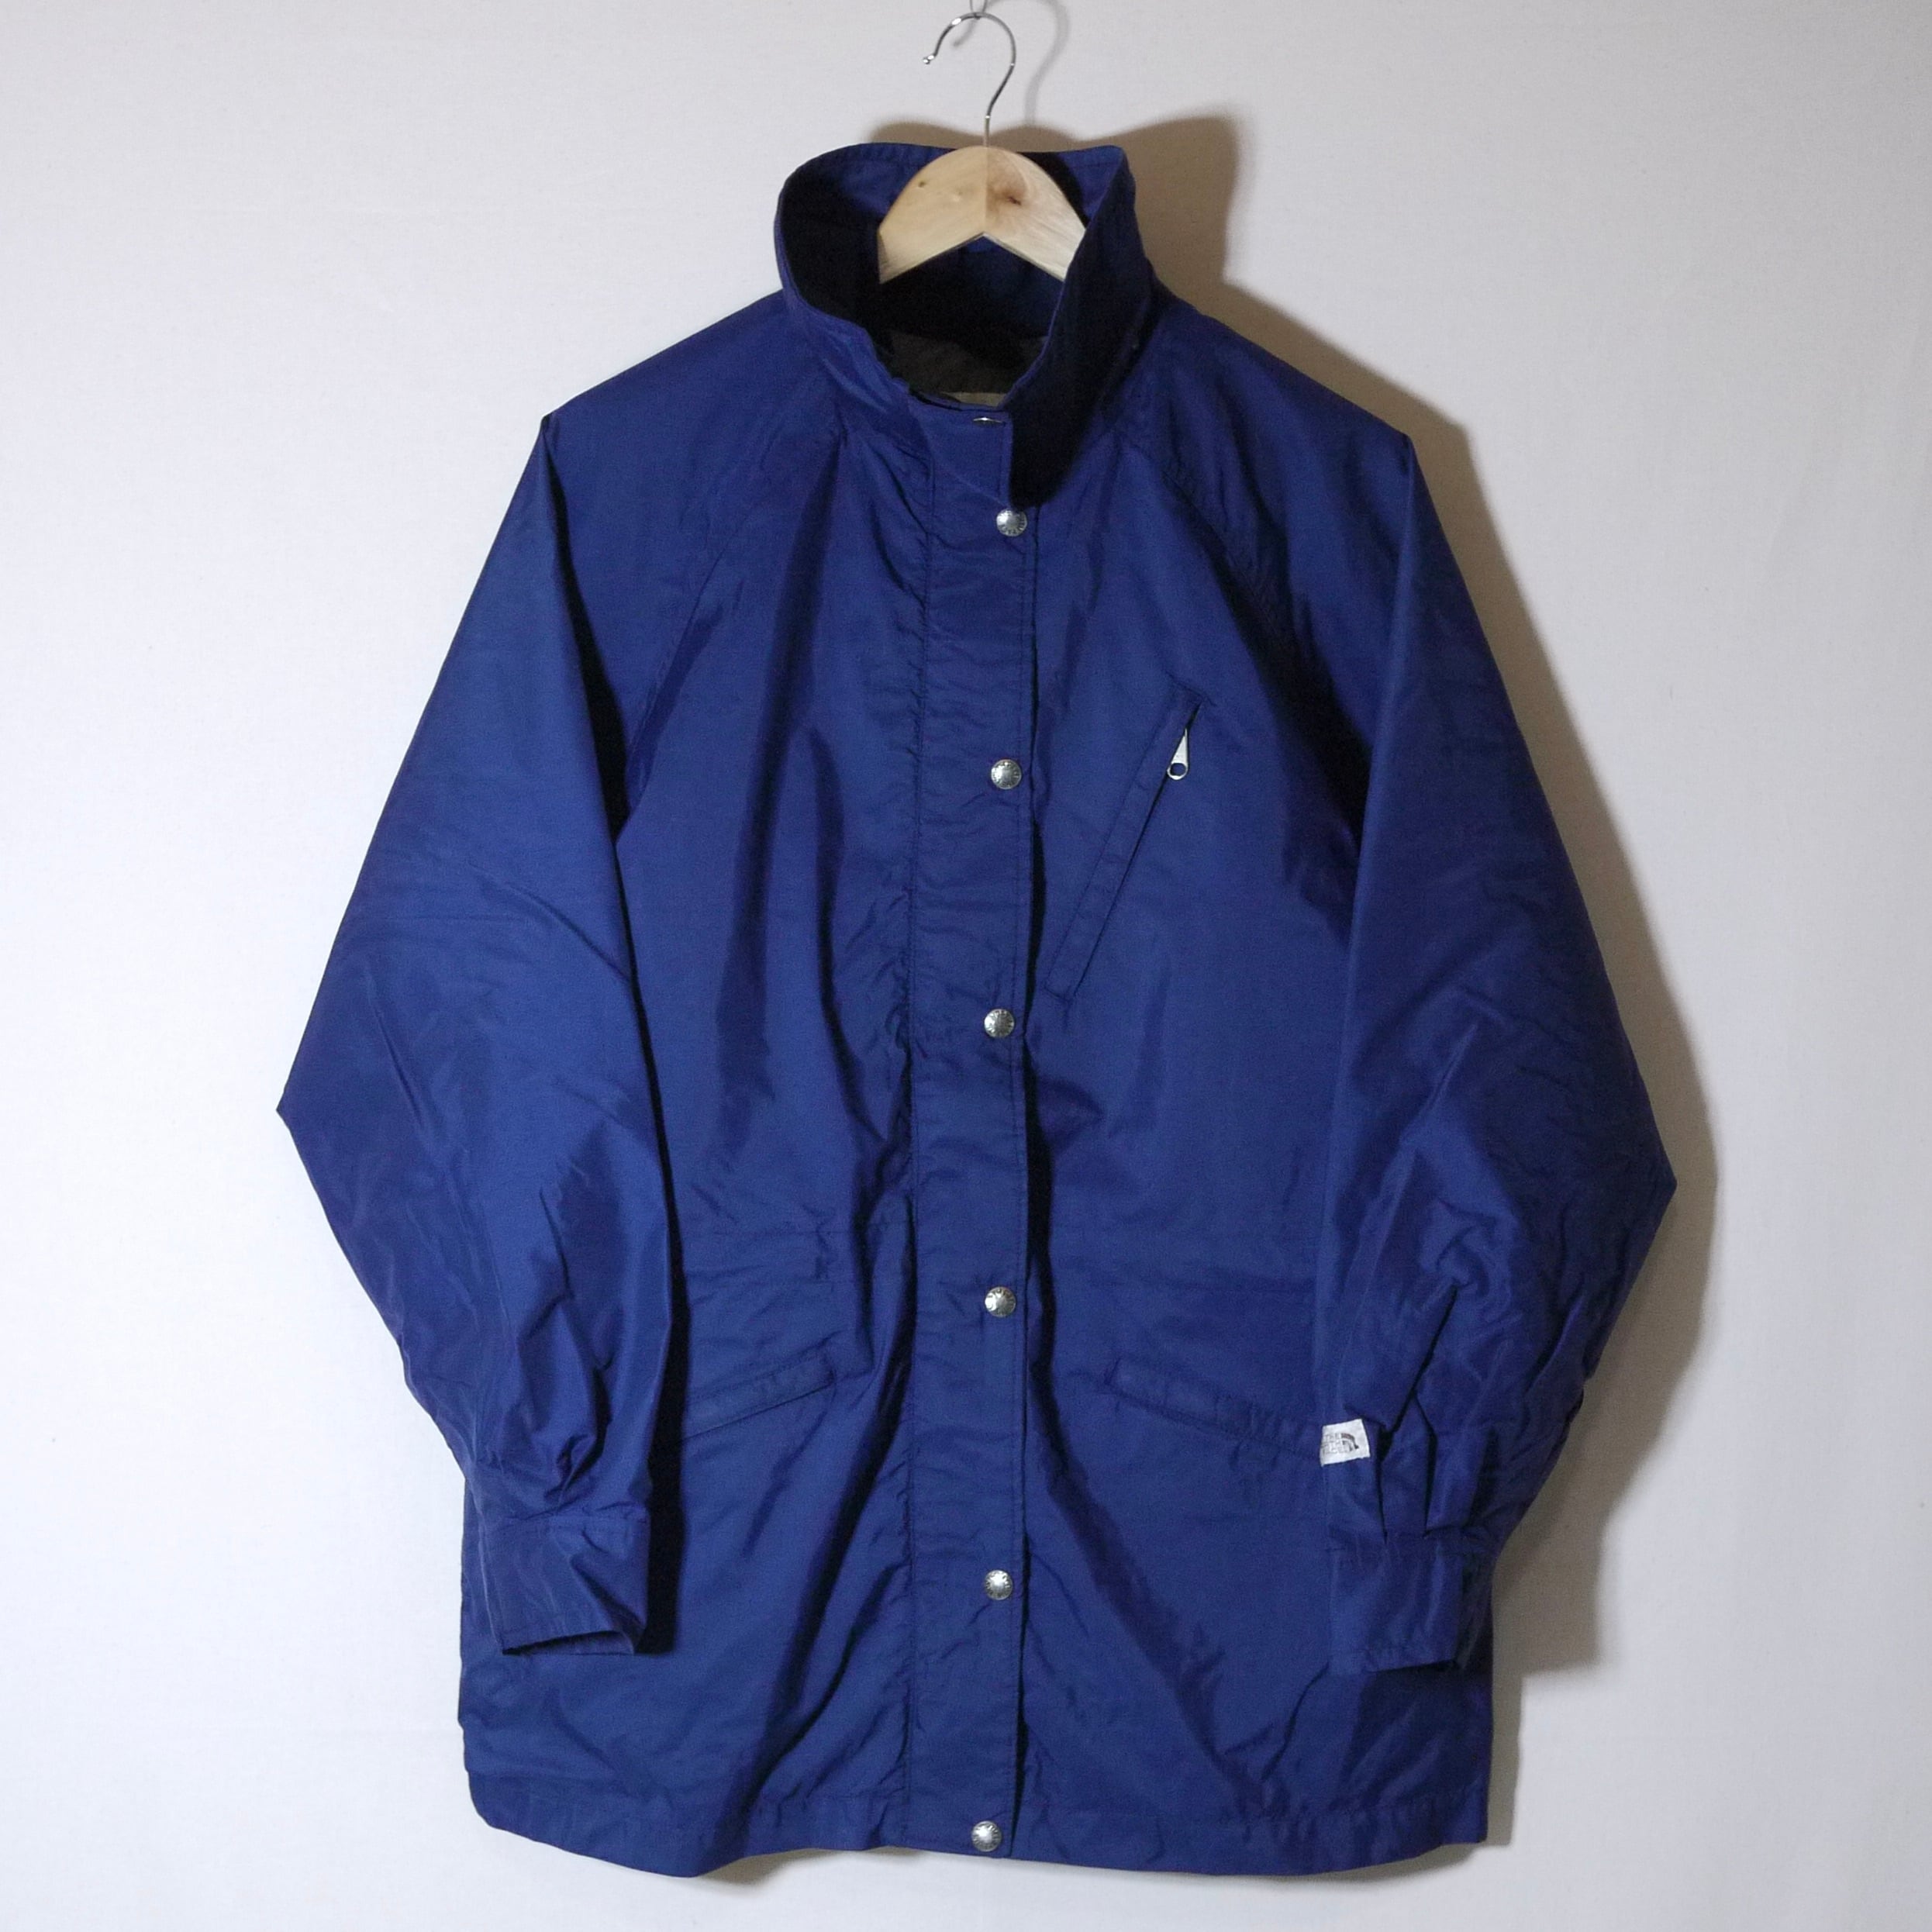 THE NORTH FACE 1980's Grizzly Peak Jacket SizeW-L